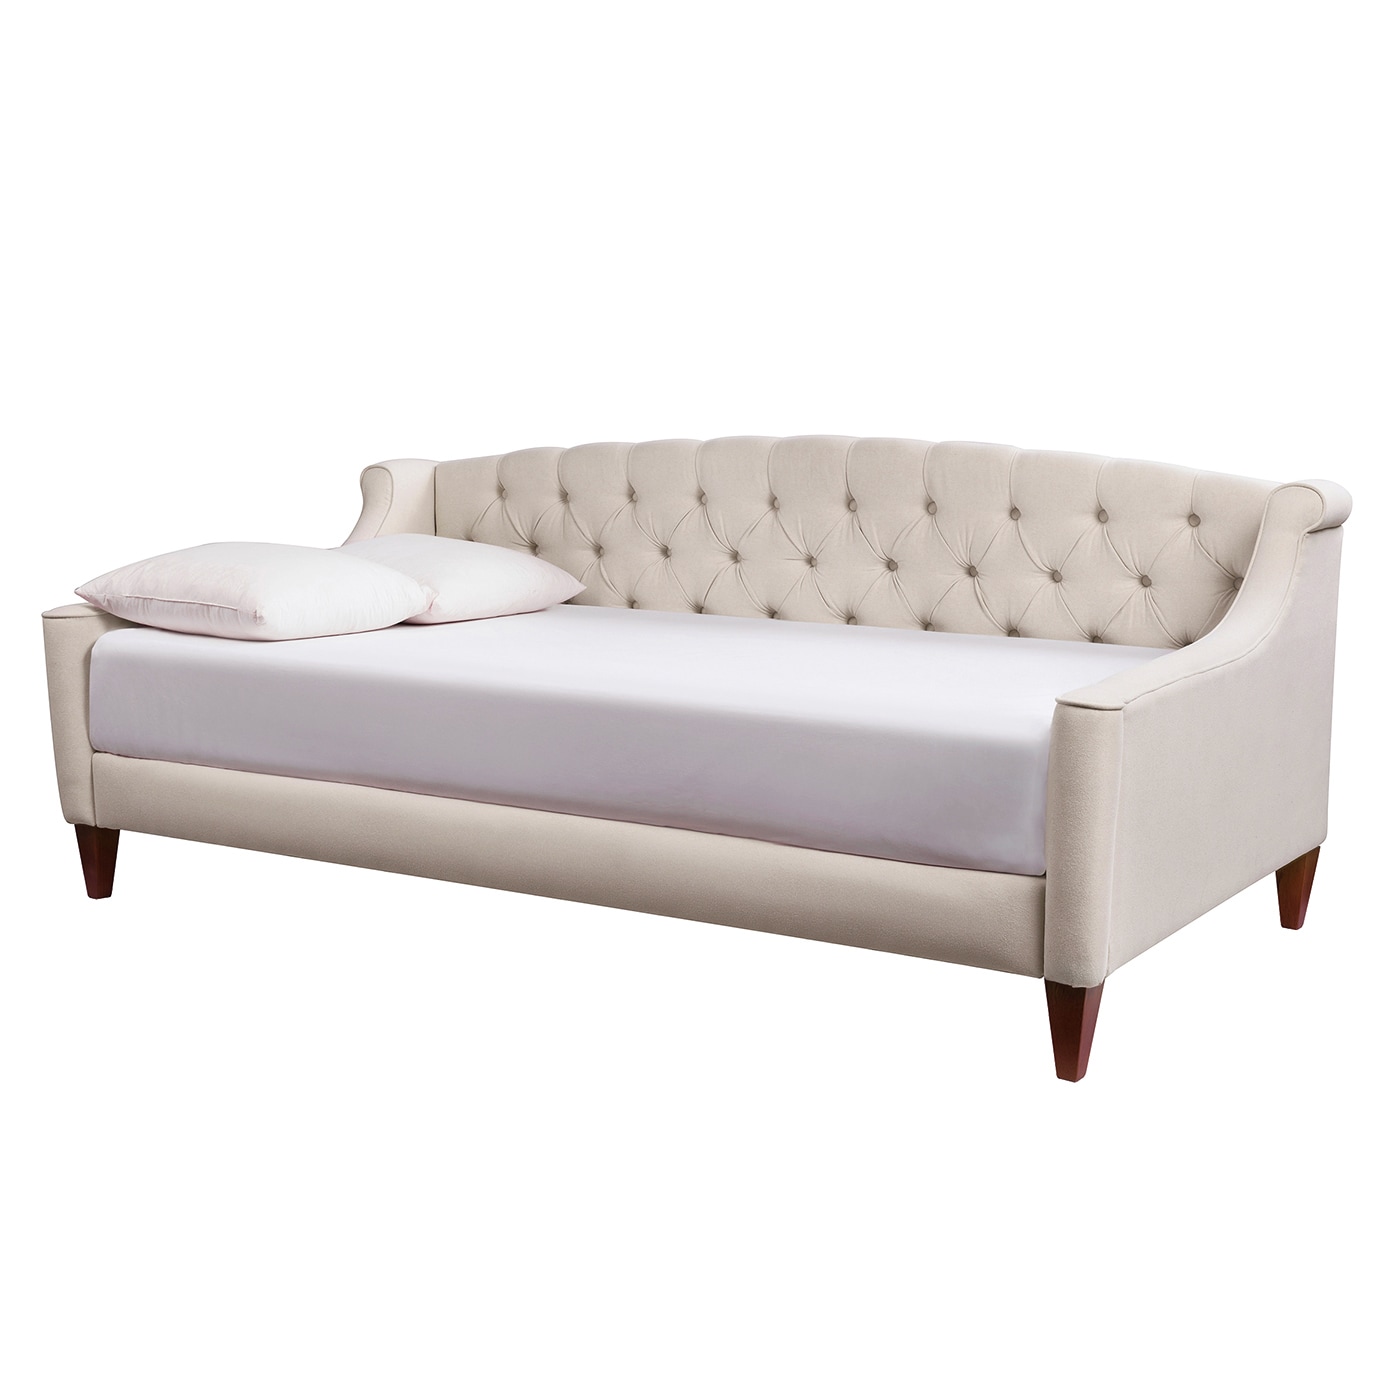 Lucy Sky Neutral Beige Yarn Dyed, Upholstered Tufted Sofa Bed